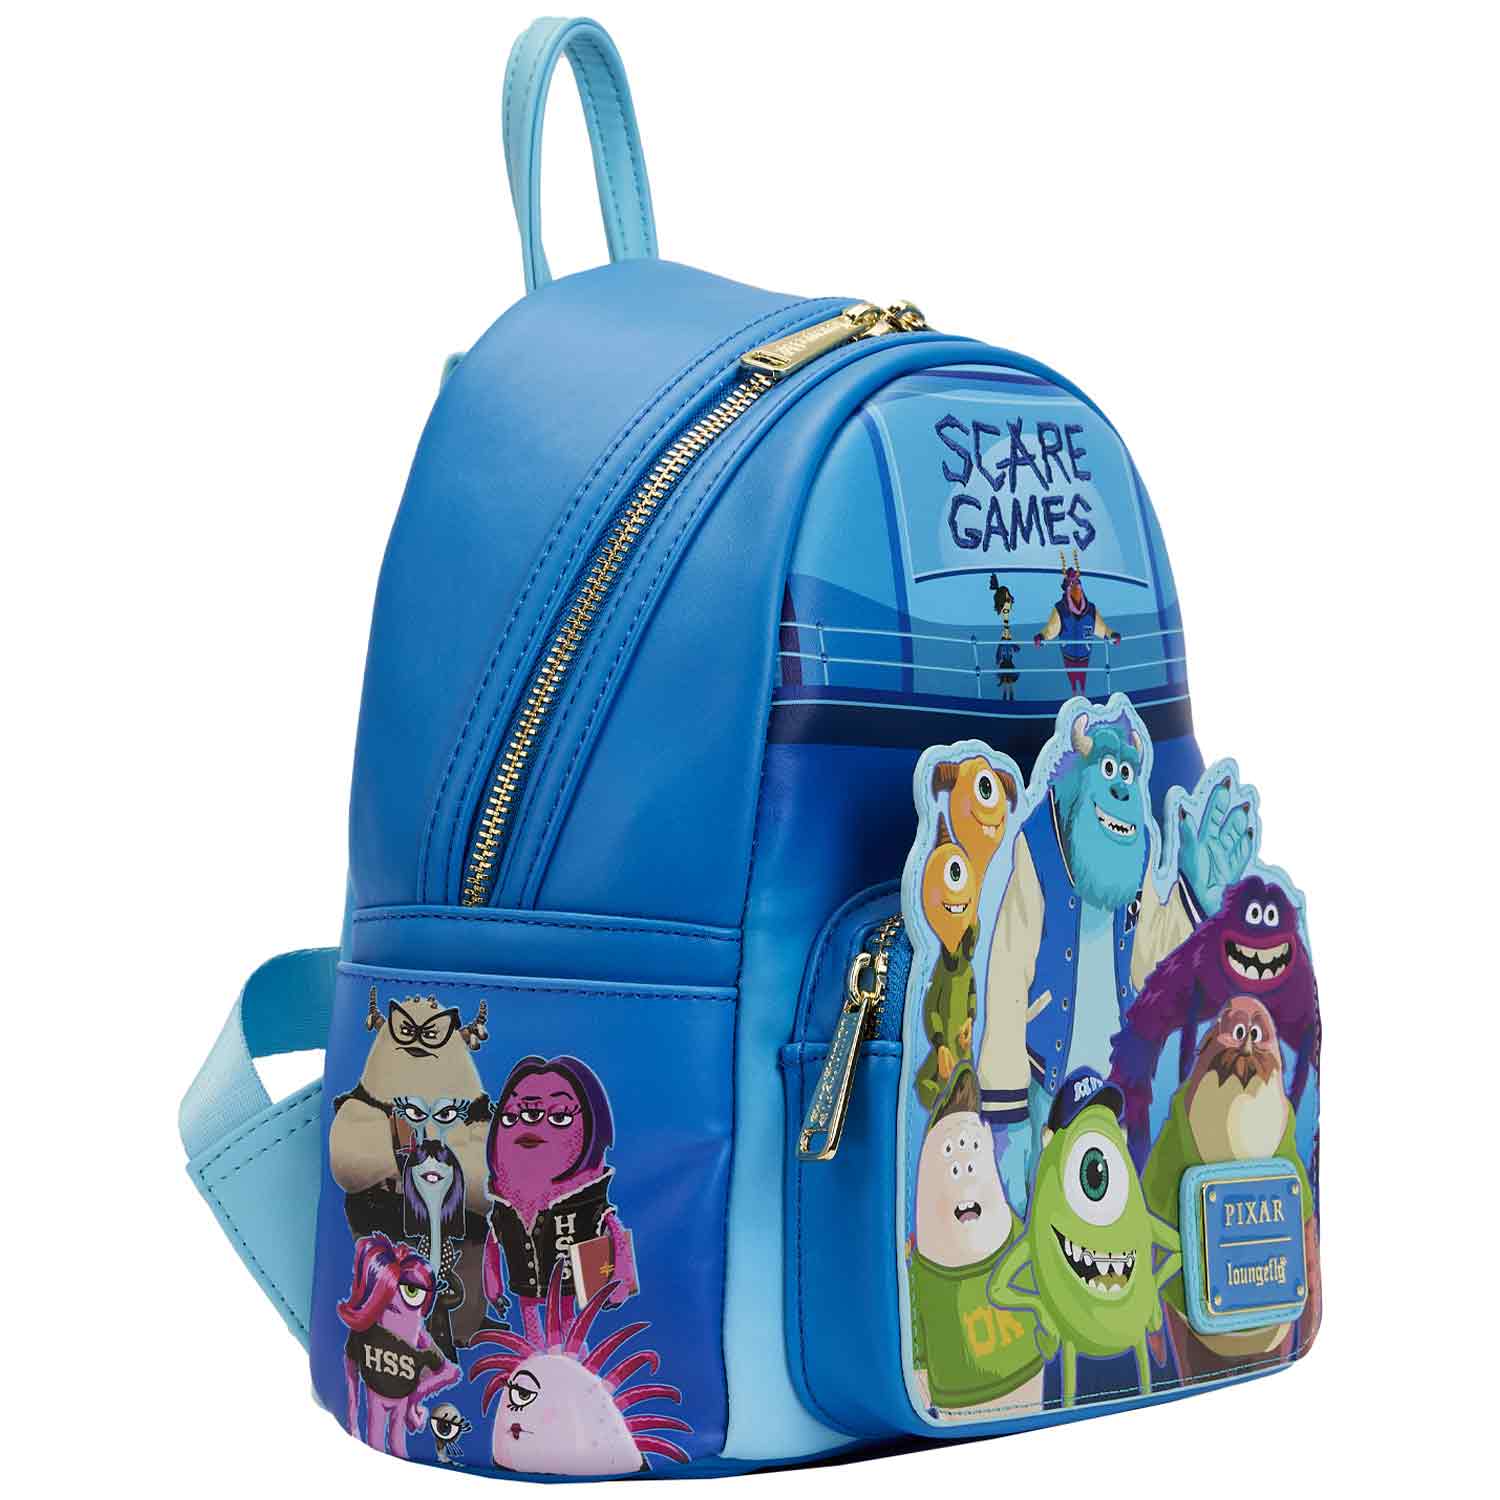 Loungefly x Disney Pixar Monsters University Scare Games Mini Backpack - GeekCore